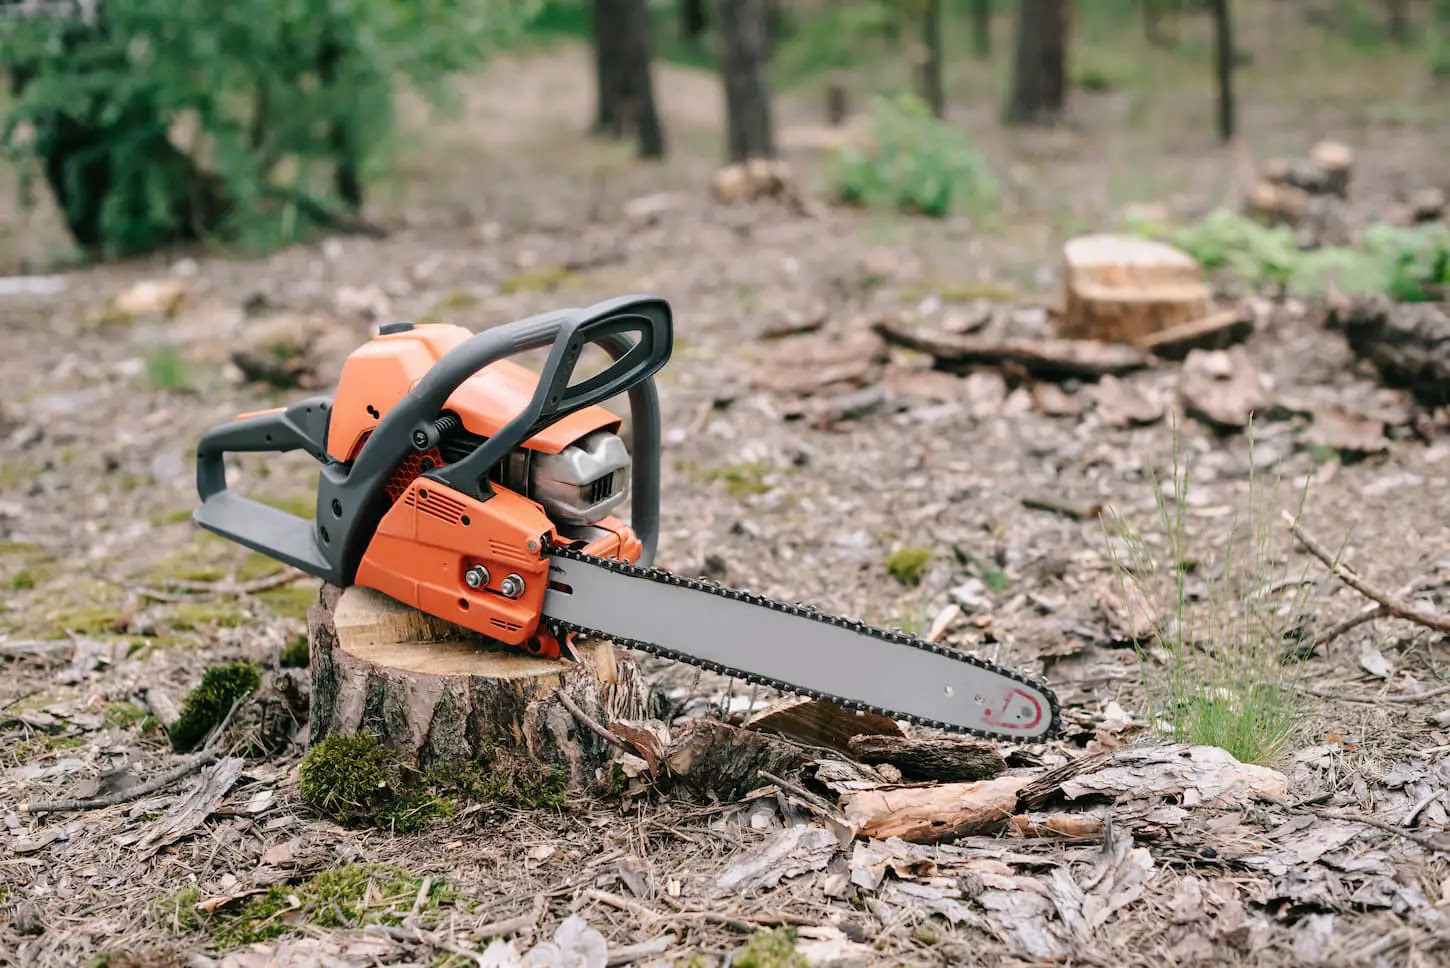 How To Store Chainsaw Without Oil Leaking